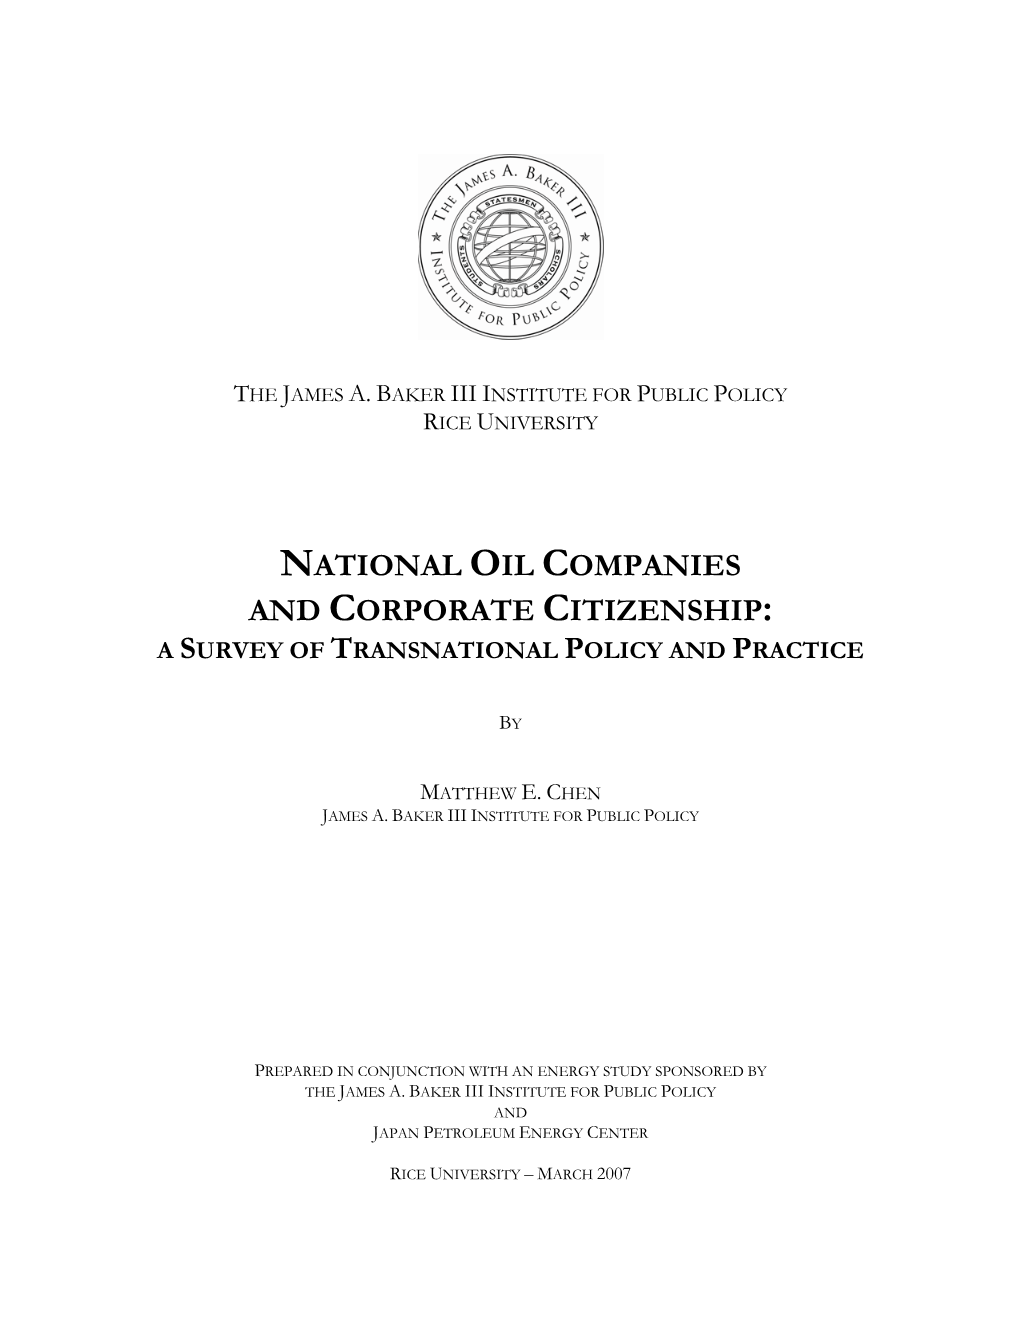 National Oil Companies and Corporate Citizenship: a Survey of Transnational Policy and Practice